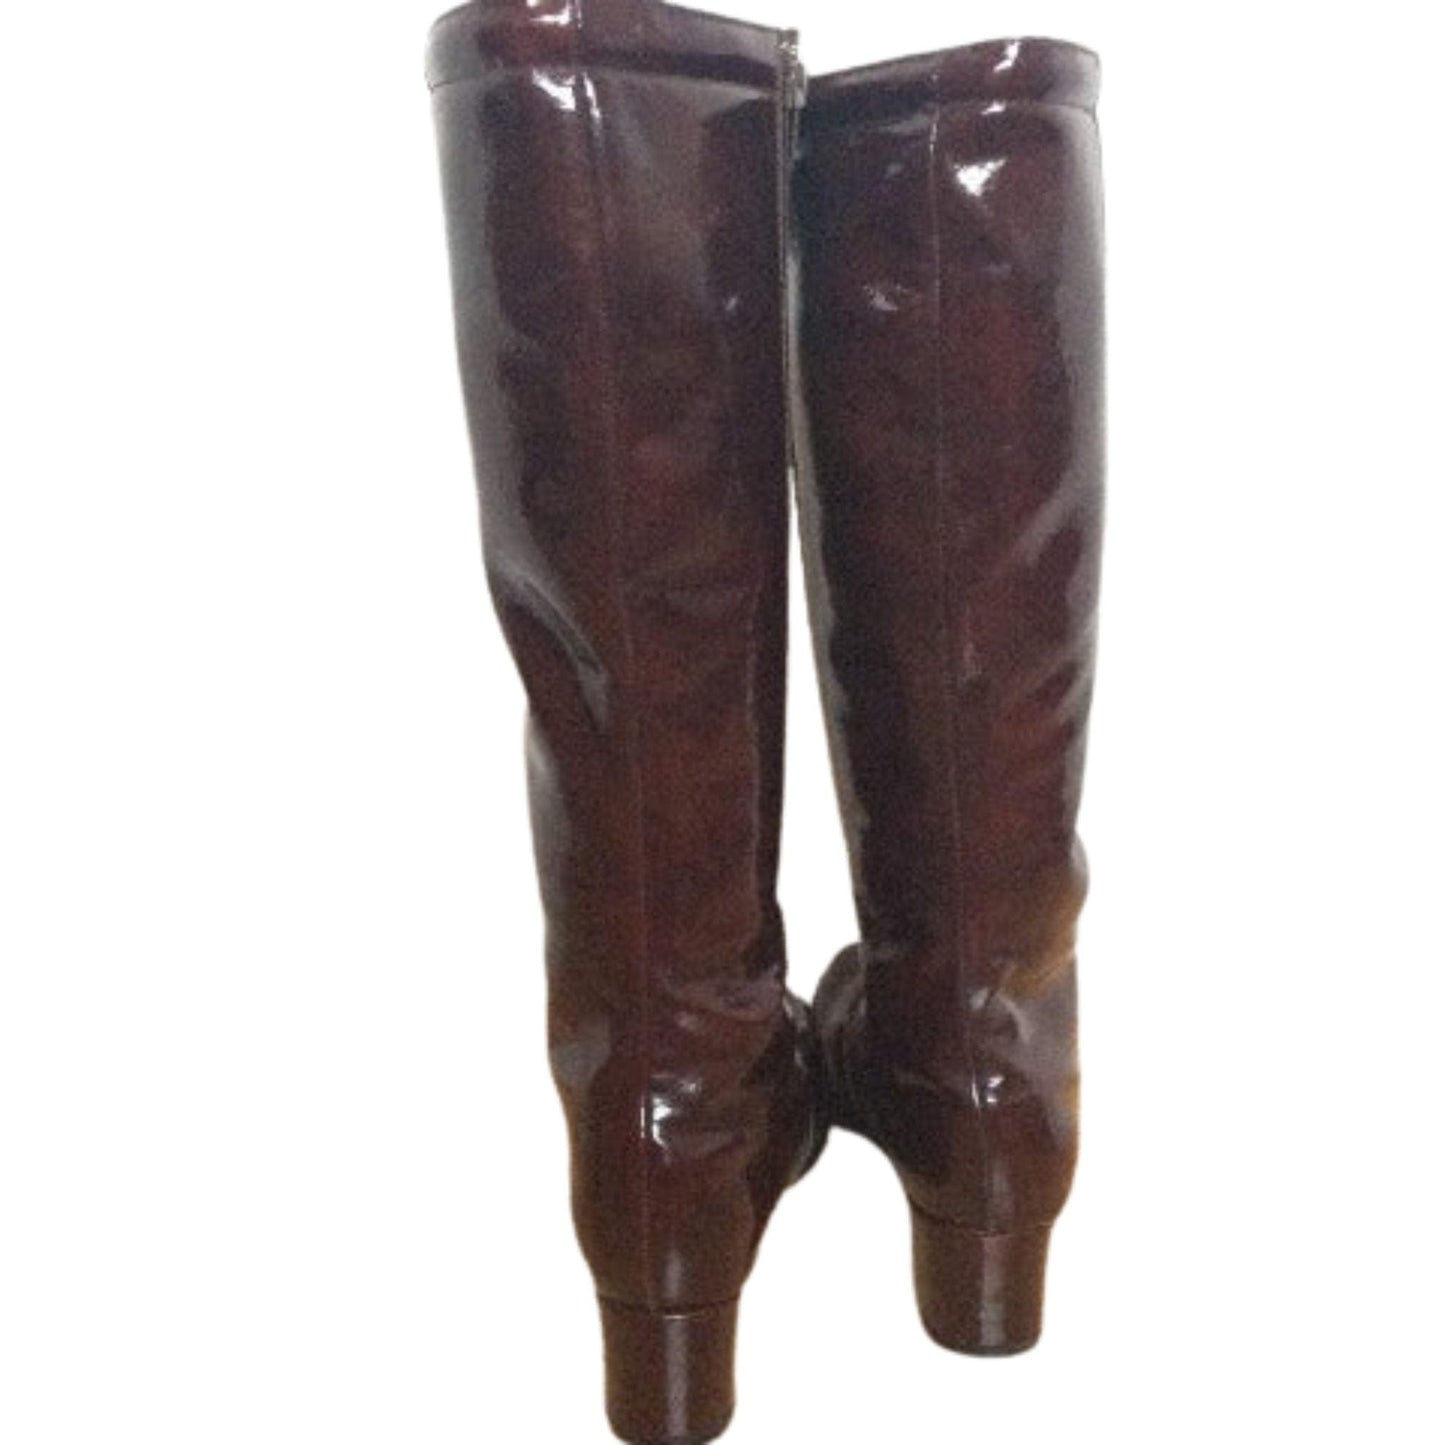 1960s Fashion Boots 8.5 / Brown / Vintage 1960s